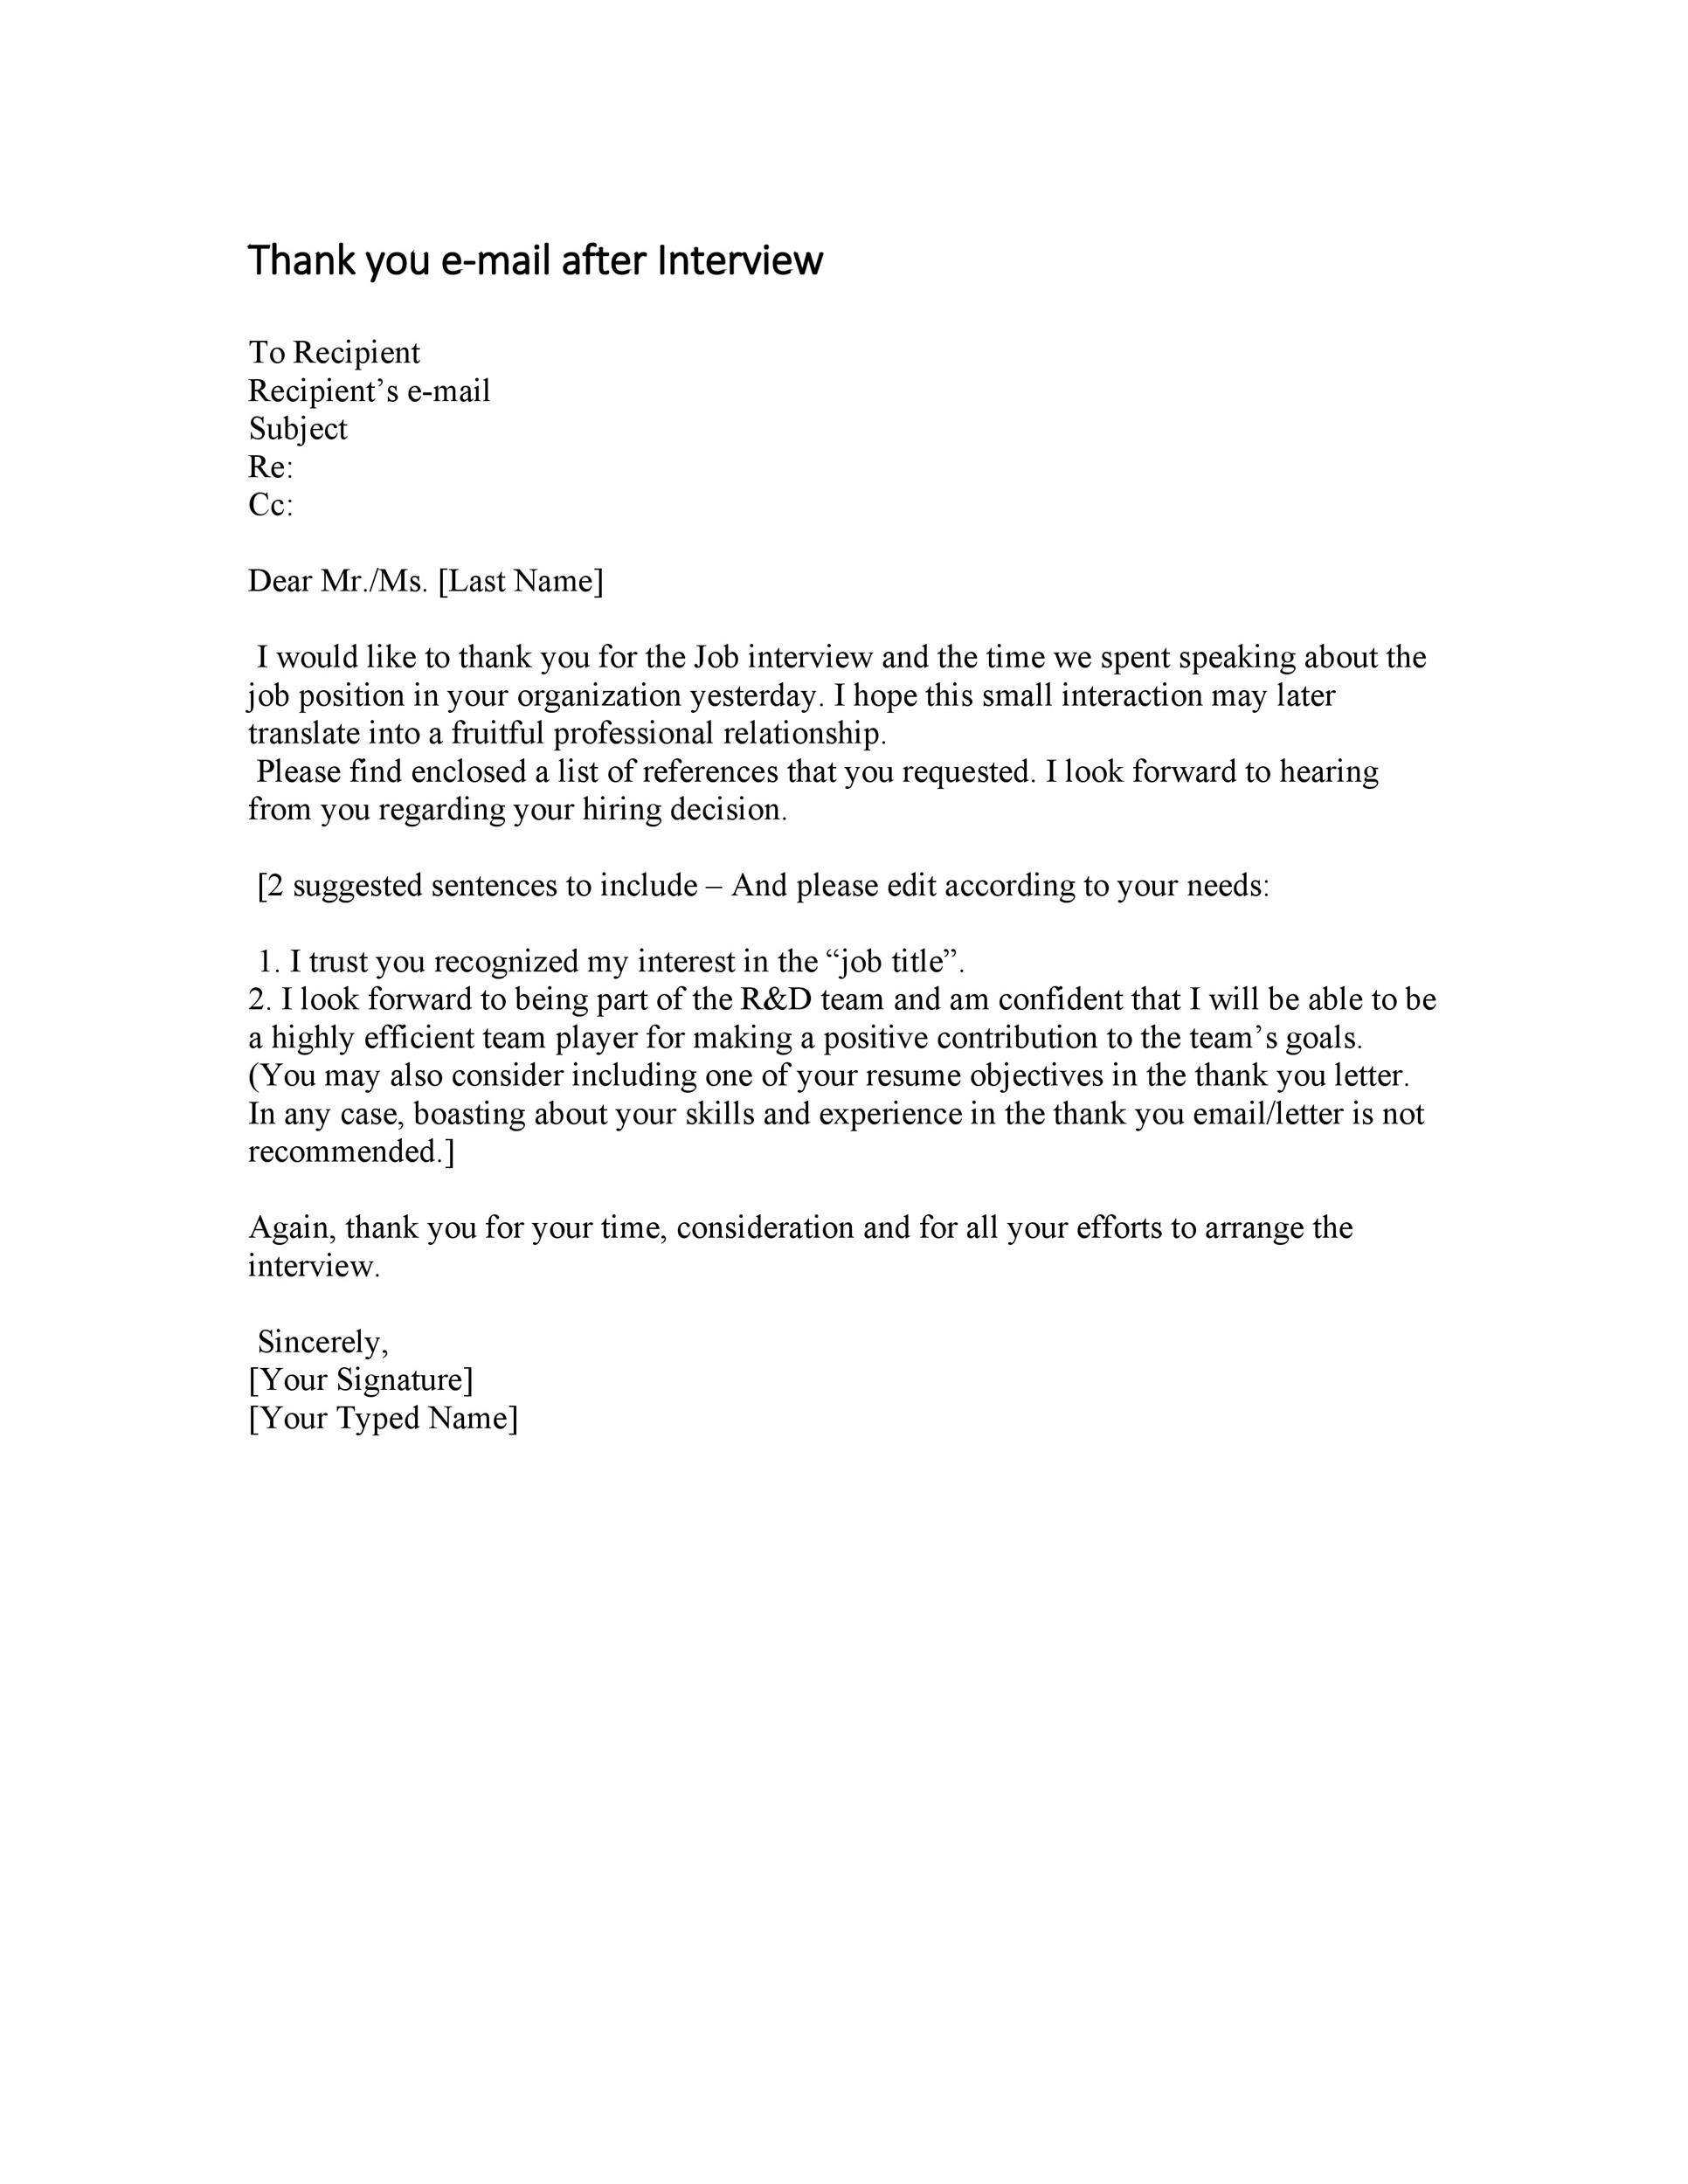 Free Thank you e-mail after Interview Template 19